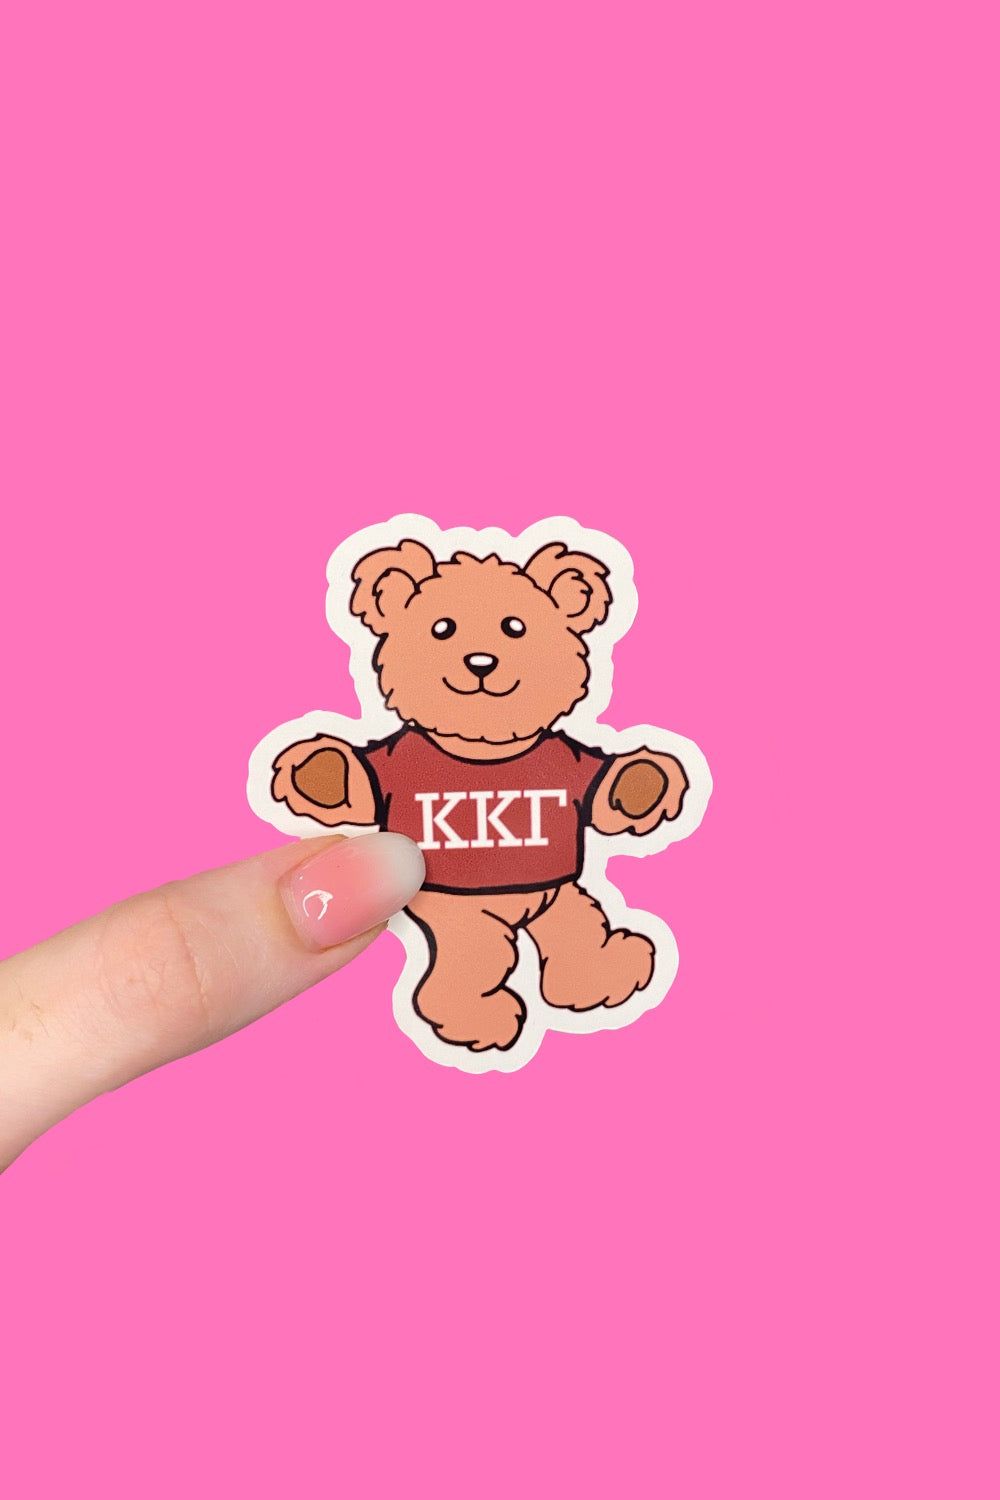 Kappa Kappa Gamma's official mascot, Teddy, is now available as a sticker! Perfect for your laptop, phone case, or any other waterproof surface. - Teddy bear